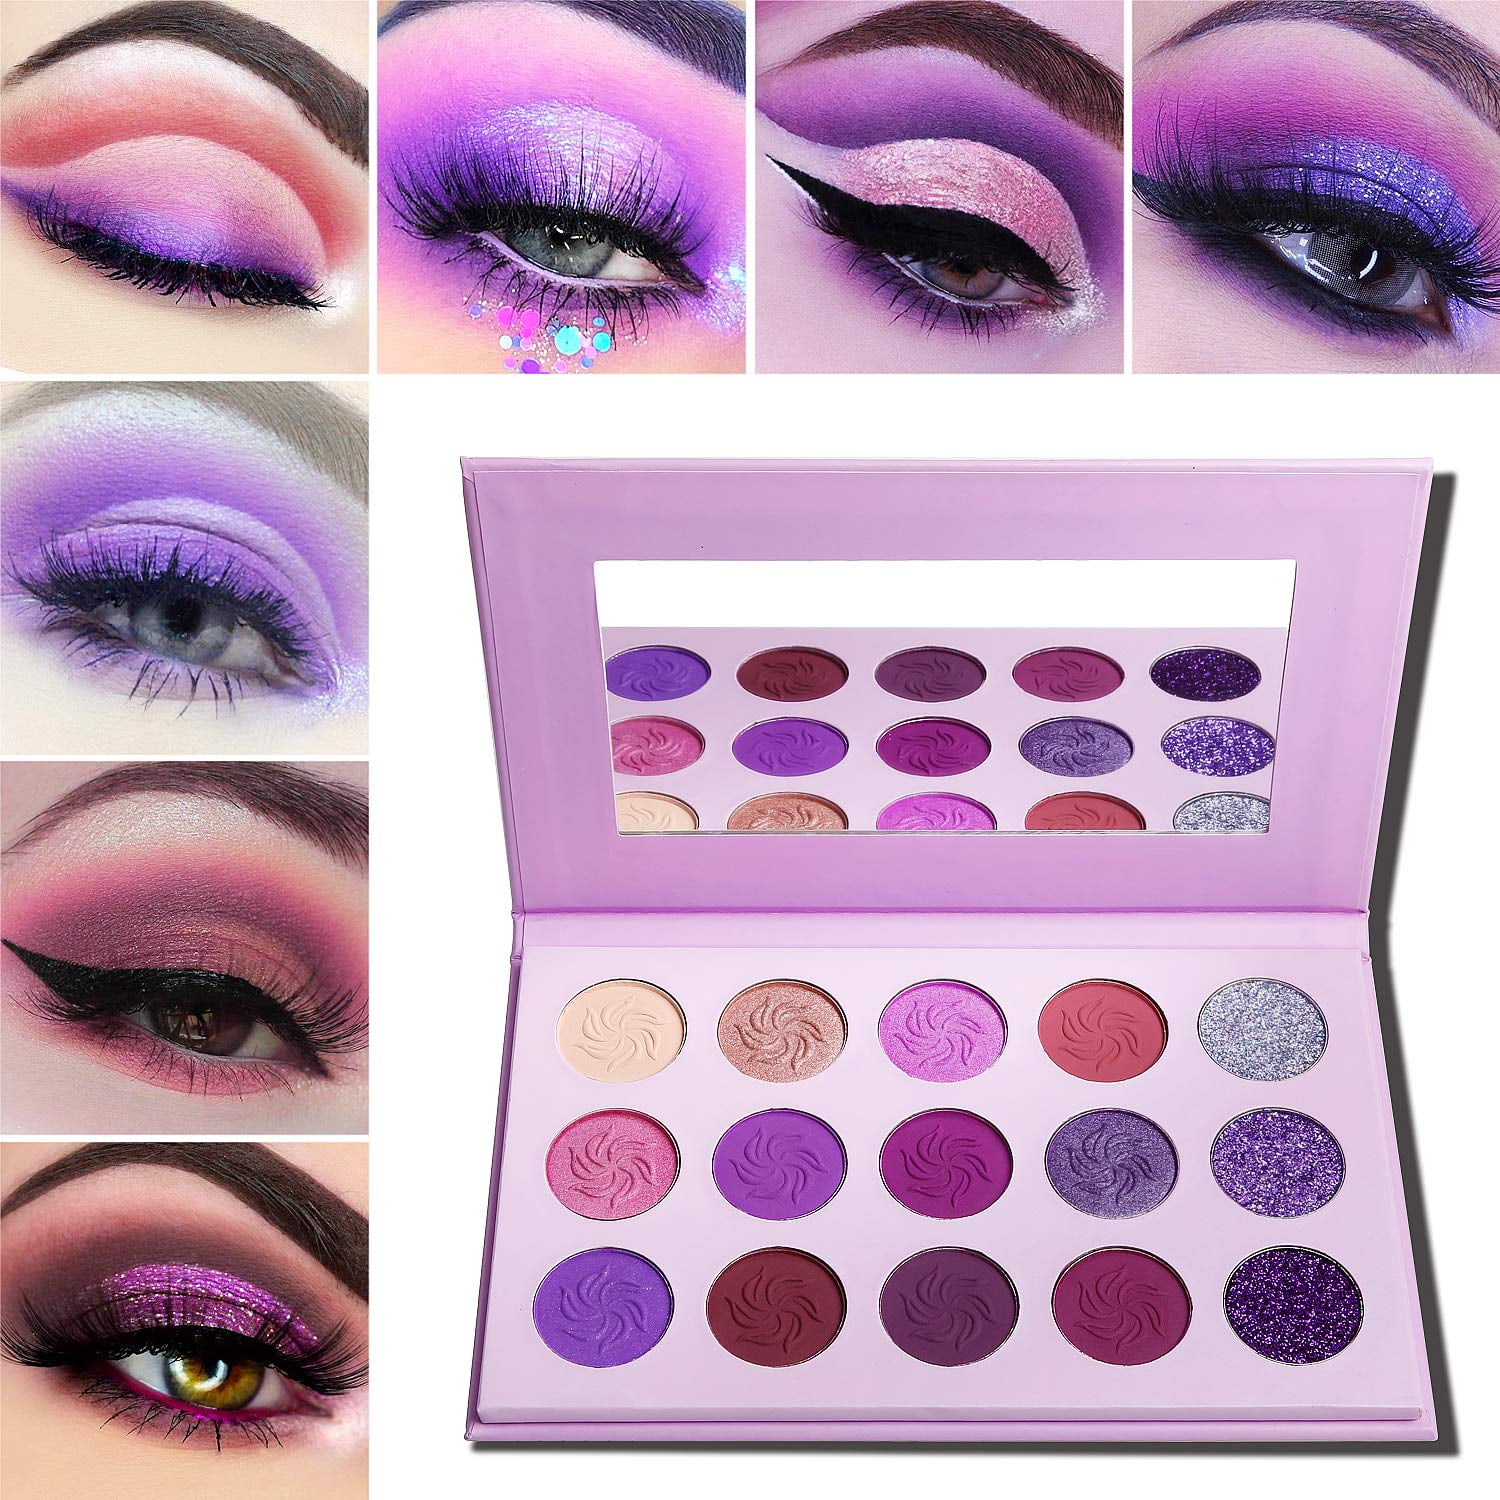 Chameleon Eyeshadow Palette 4 Long Lasting Matte, Glitter, And Shimmer  Shades For Cool Breeze Meaning Smoky Makeup Waterproof And Cool Breeze  Meaning Girlcult 230810 From Yao07, $61.91